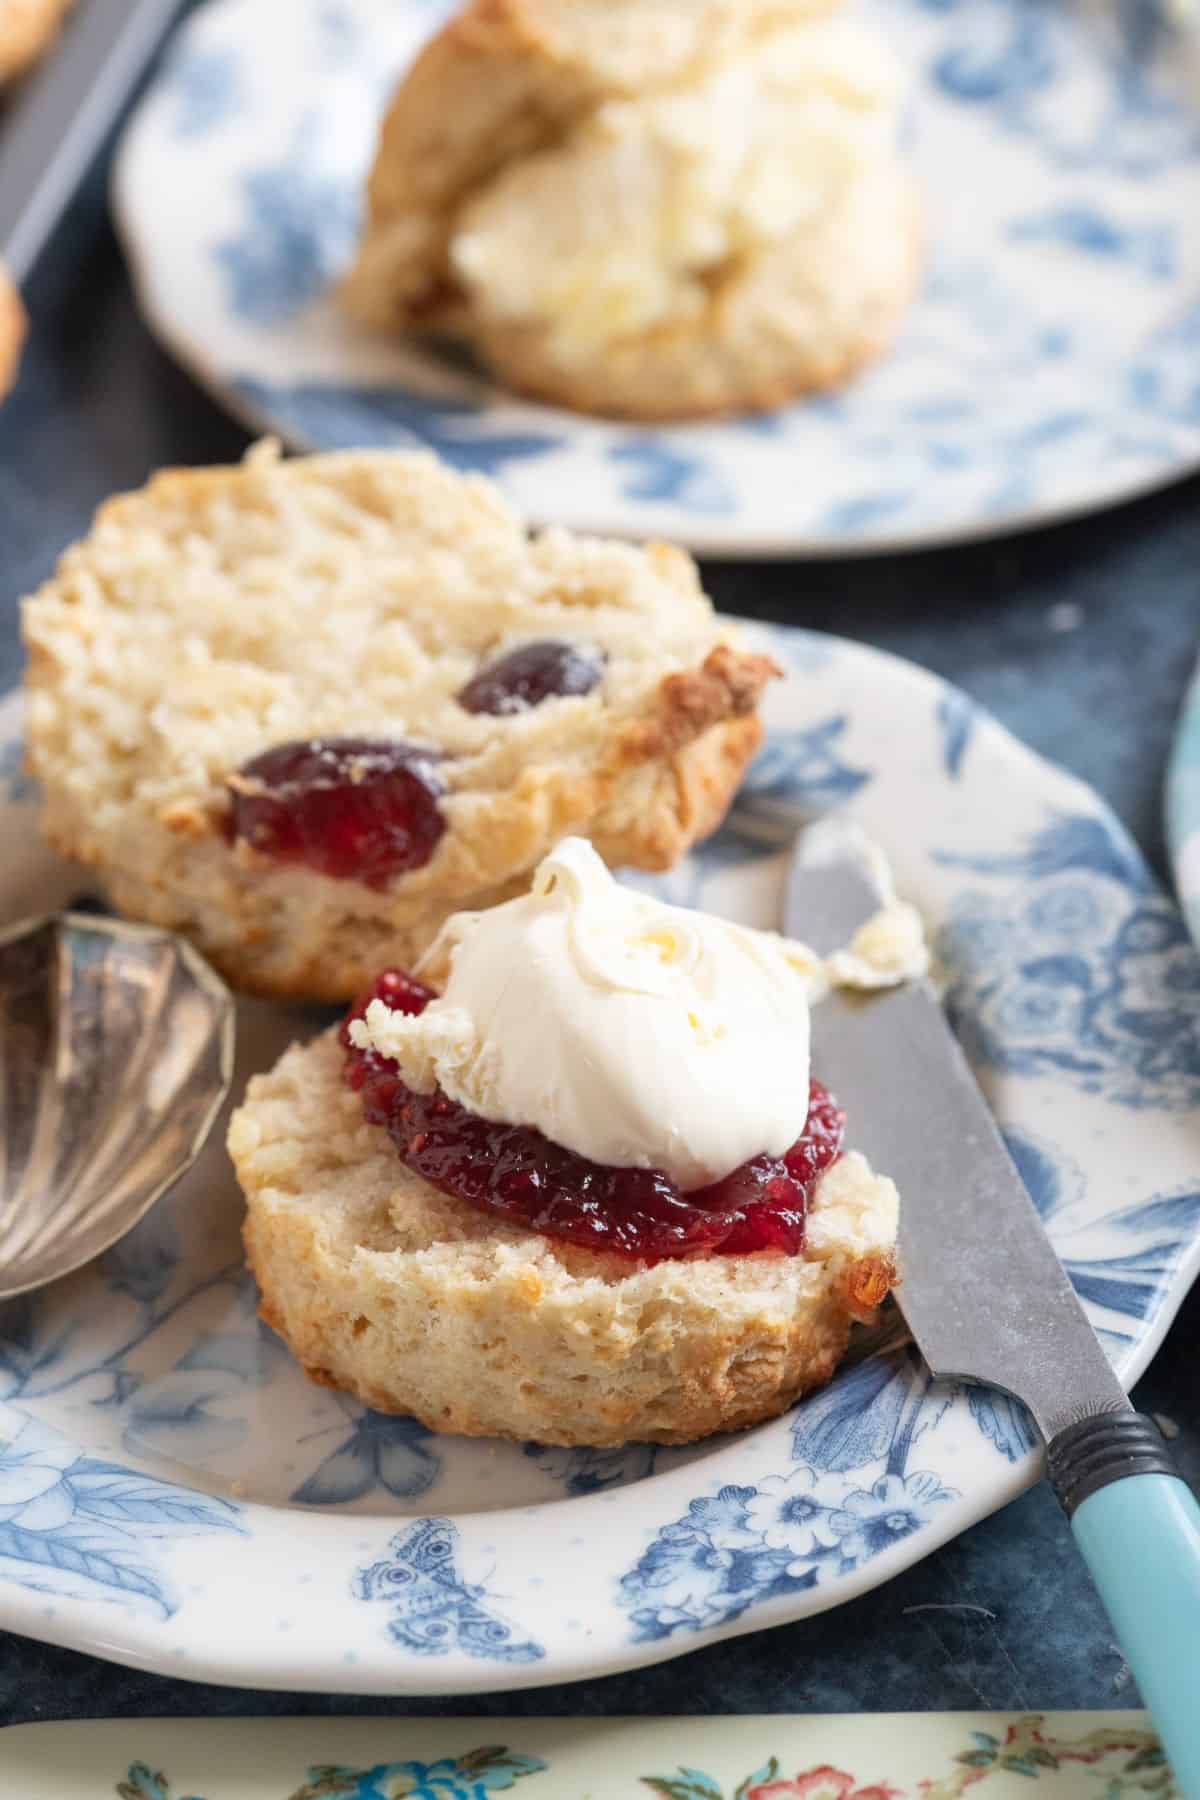 Scones made with buttermilk.